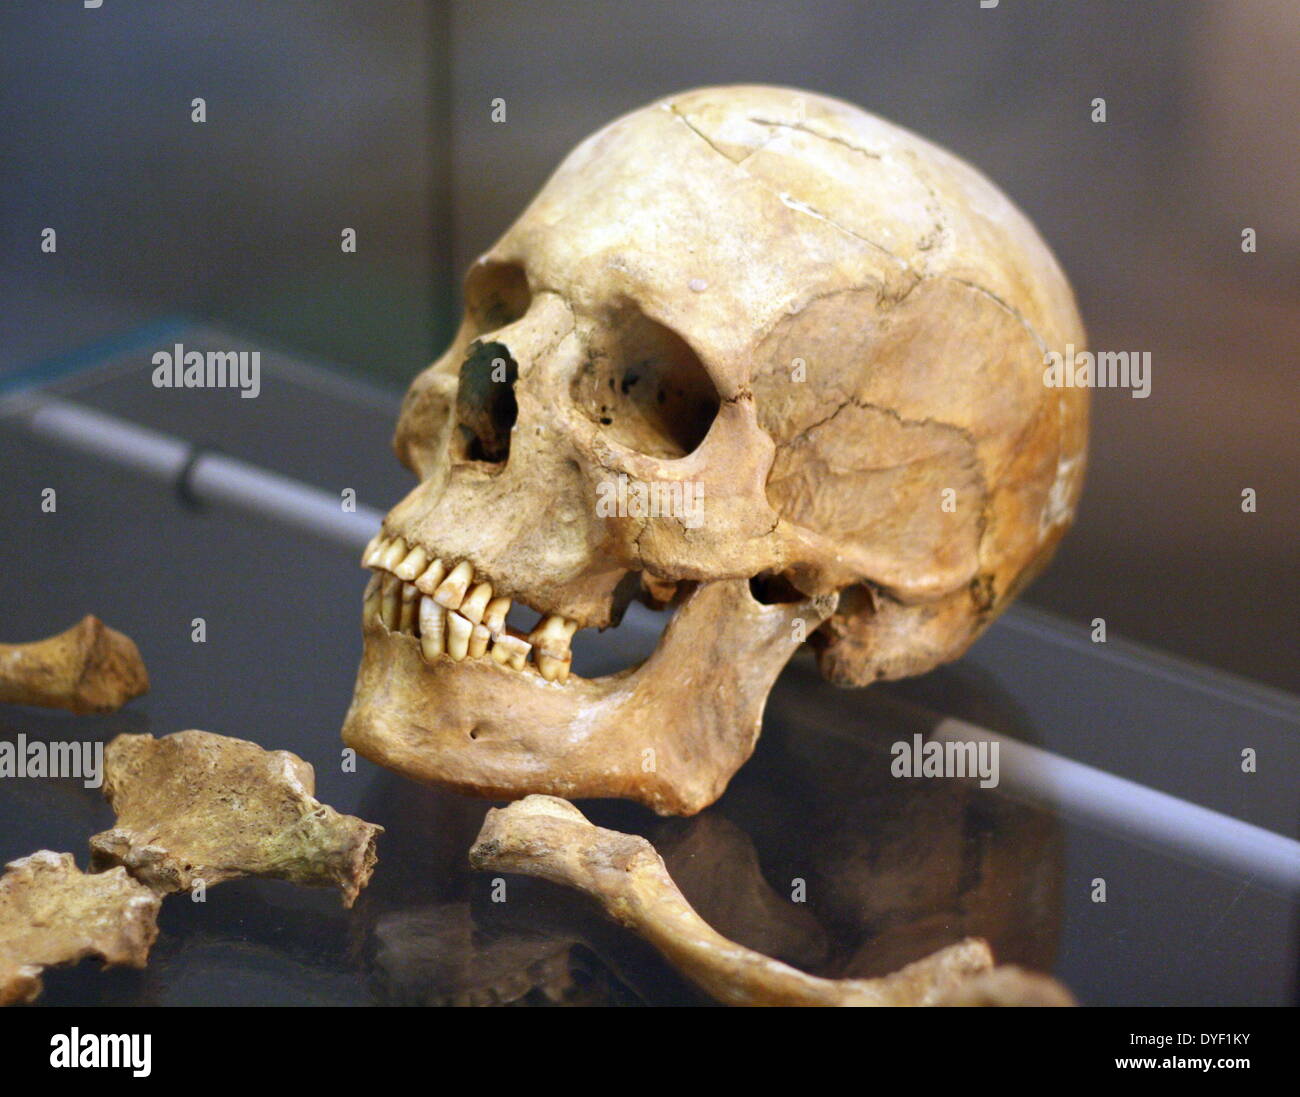 Reconstructed skull from the remains of a Syrian man aged about 45 years. It was reconstructed from remains found in a lead coffin liner. Stock Photo